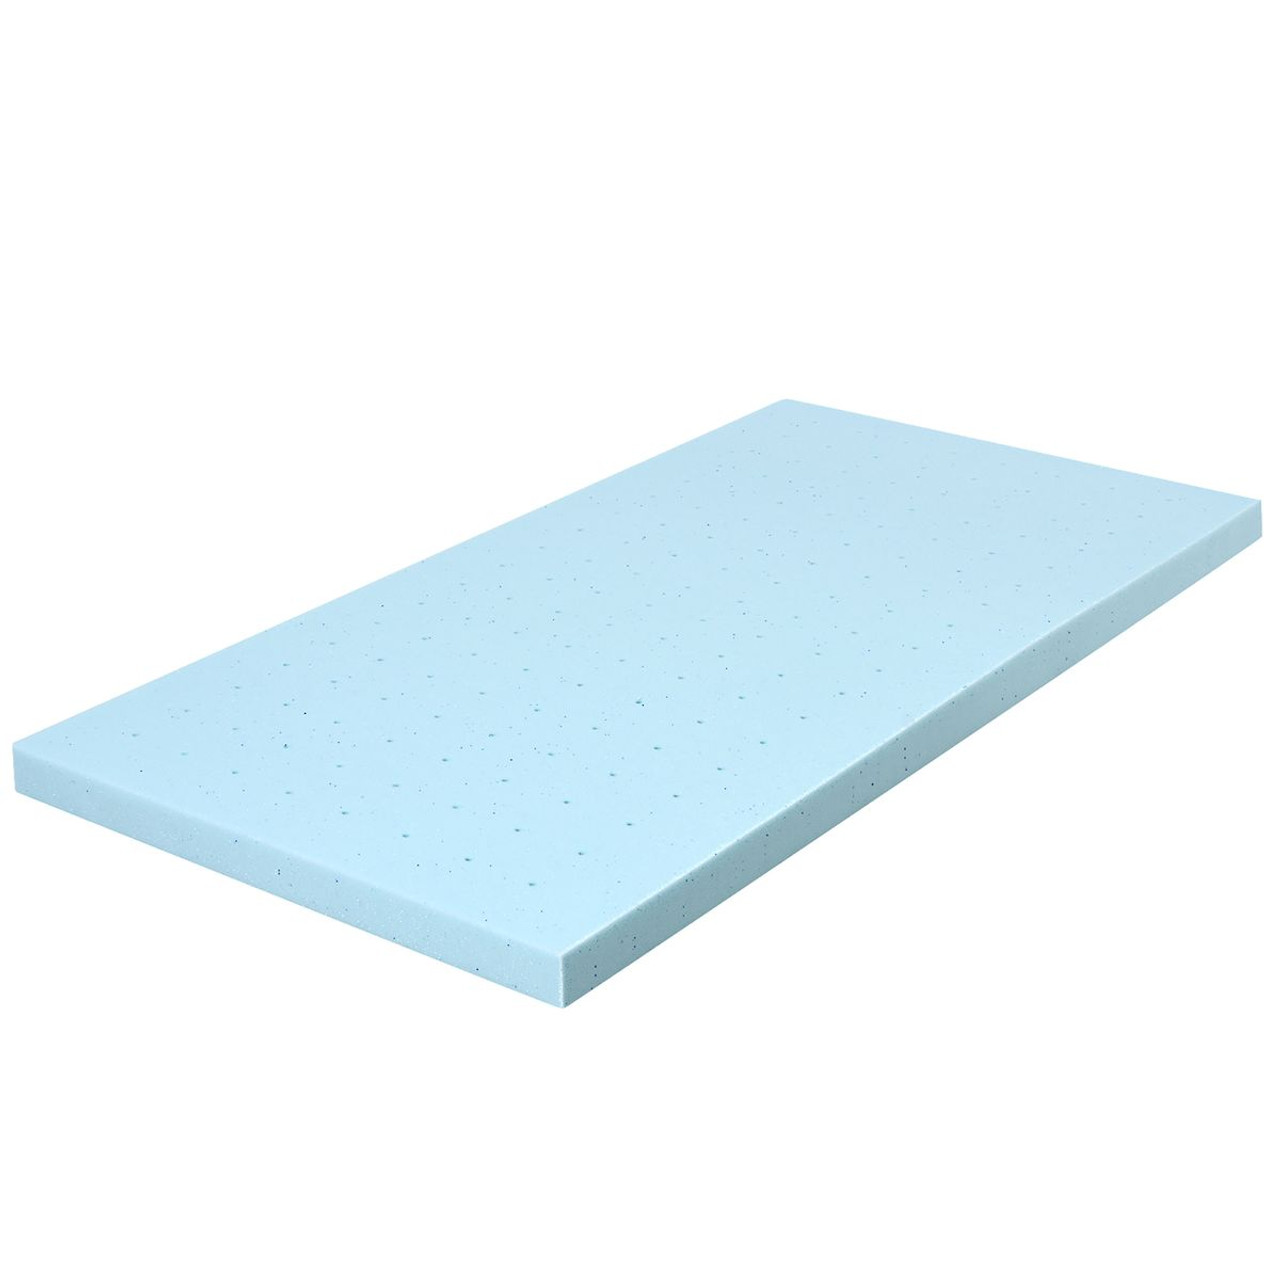 4''Gel-Infused Memory Foam Mattress Topper Ventilated Bed Pad product image